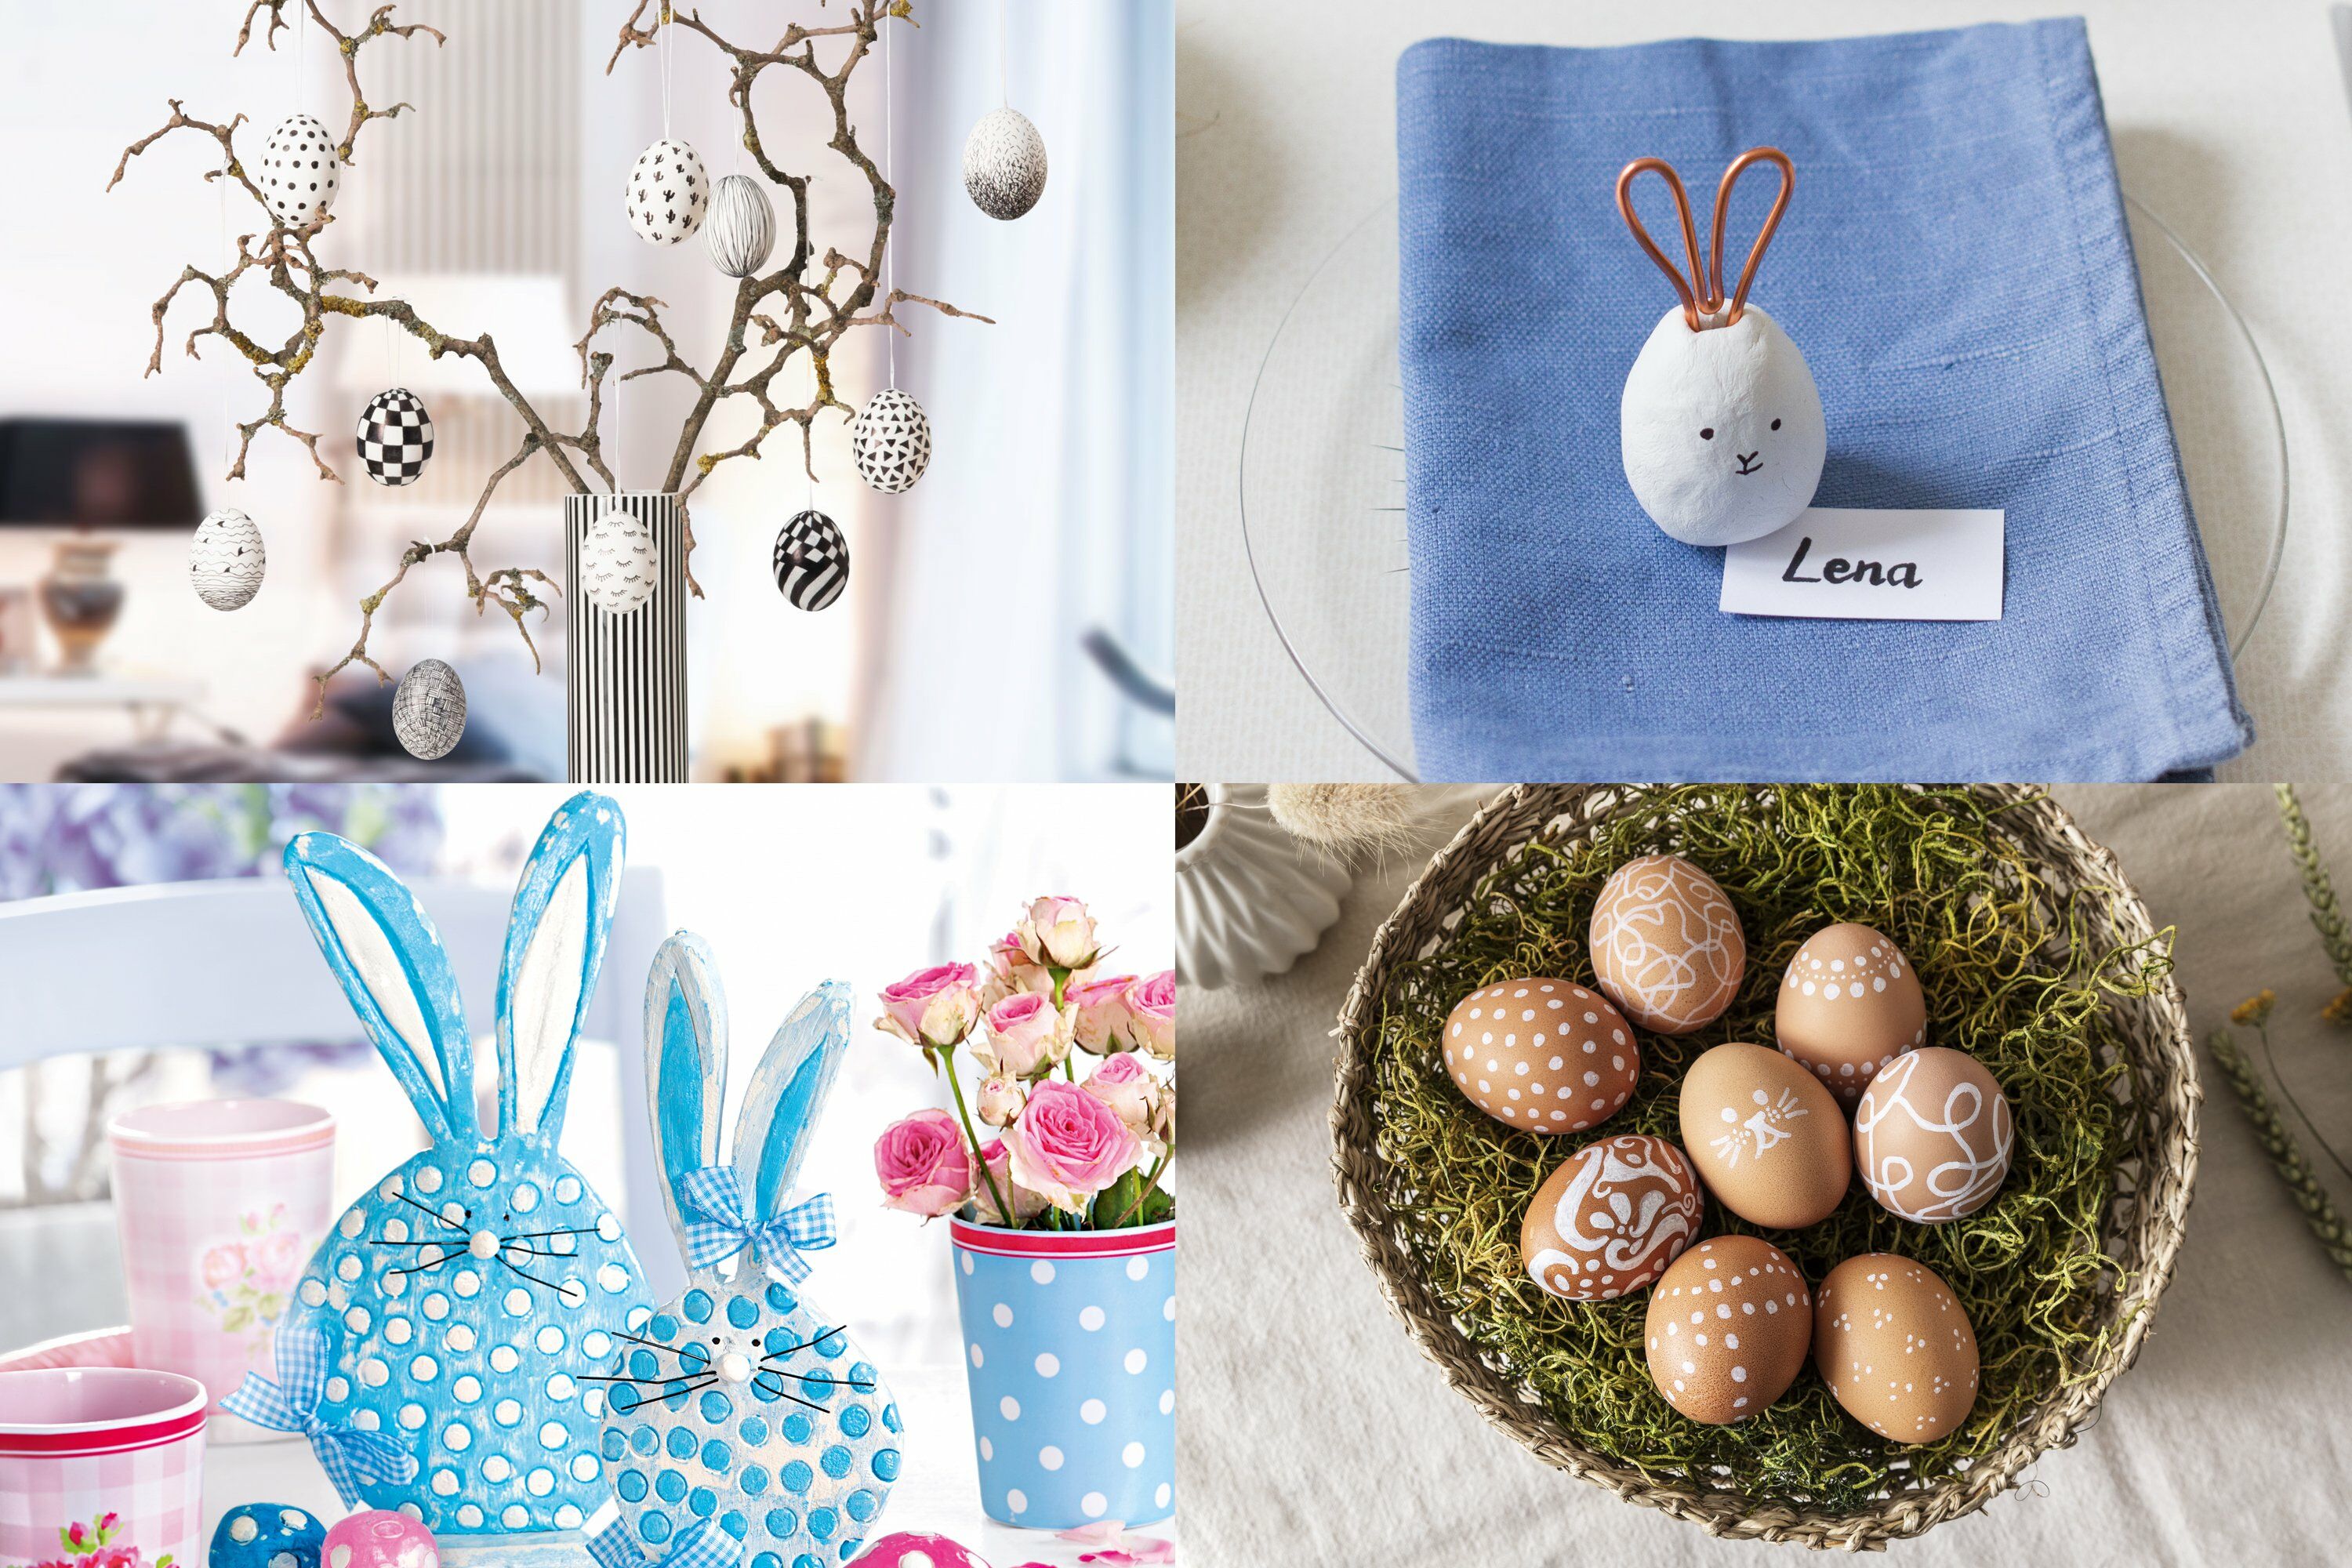 Easy DIY Easter decorations to welcome spring